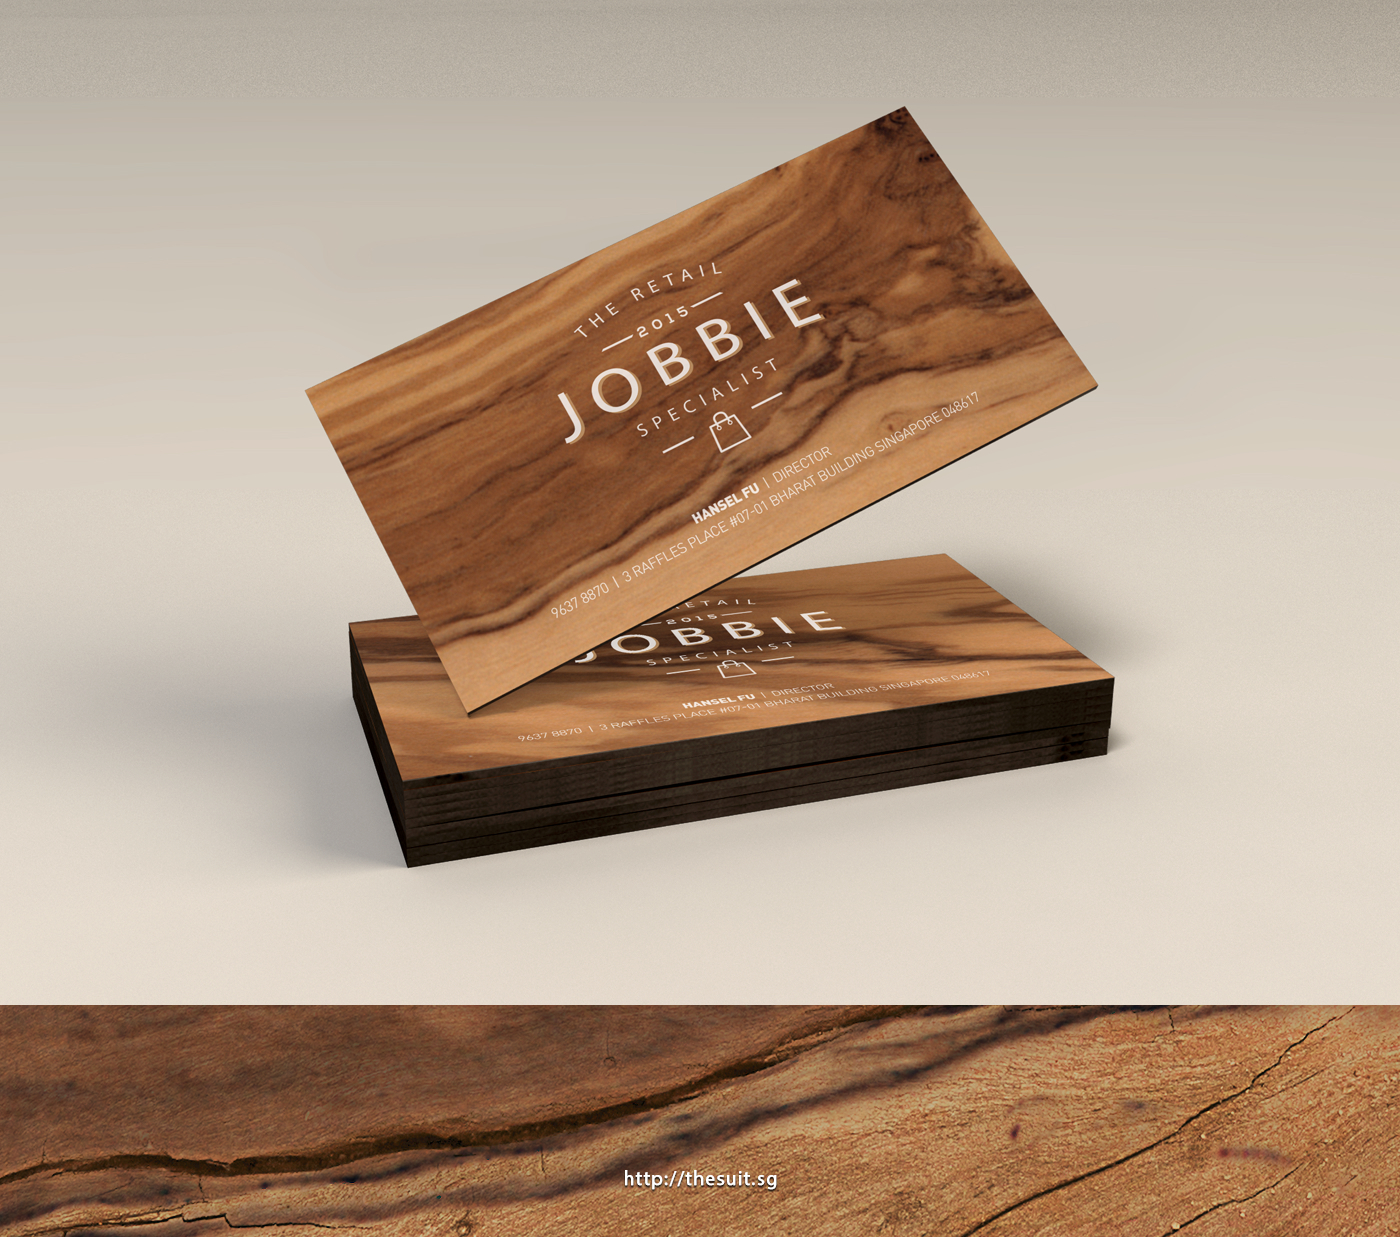 recruitment agency wood design clean modern minimalist Motion graphic video video one pager